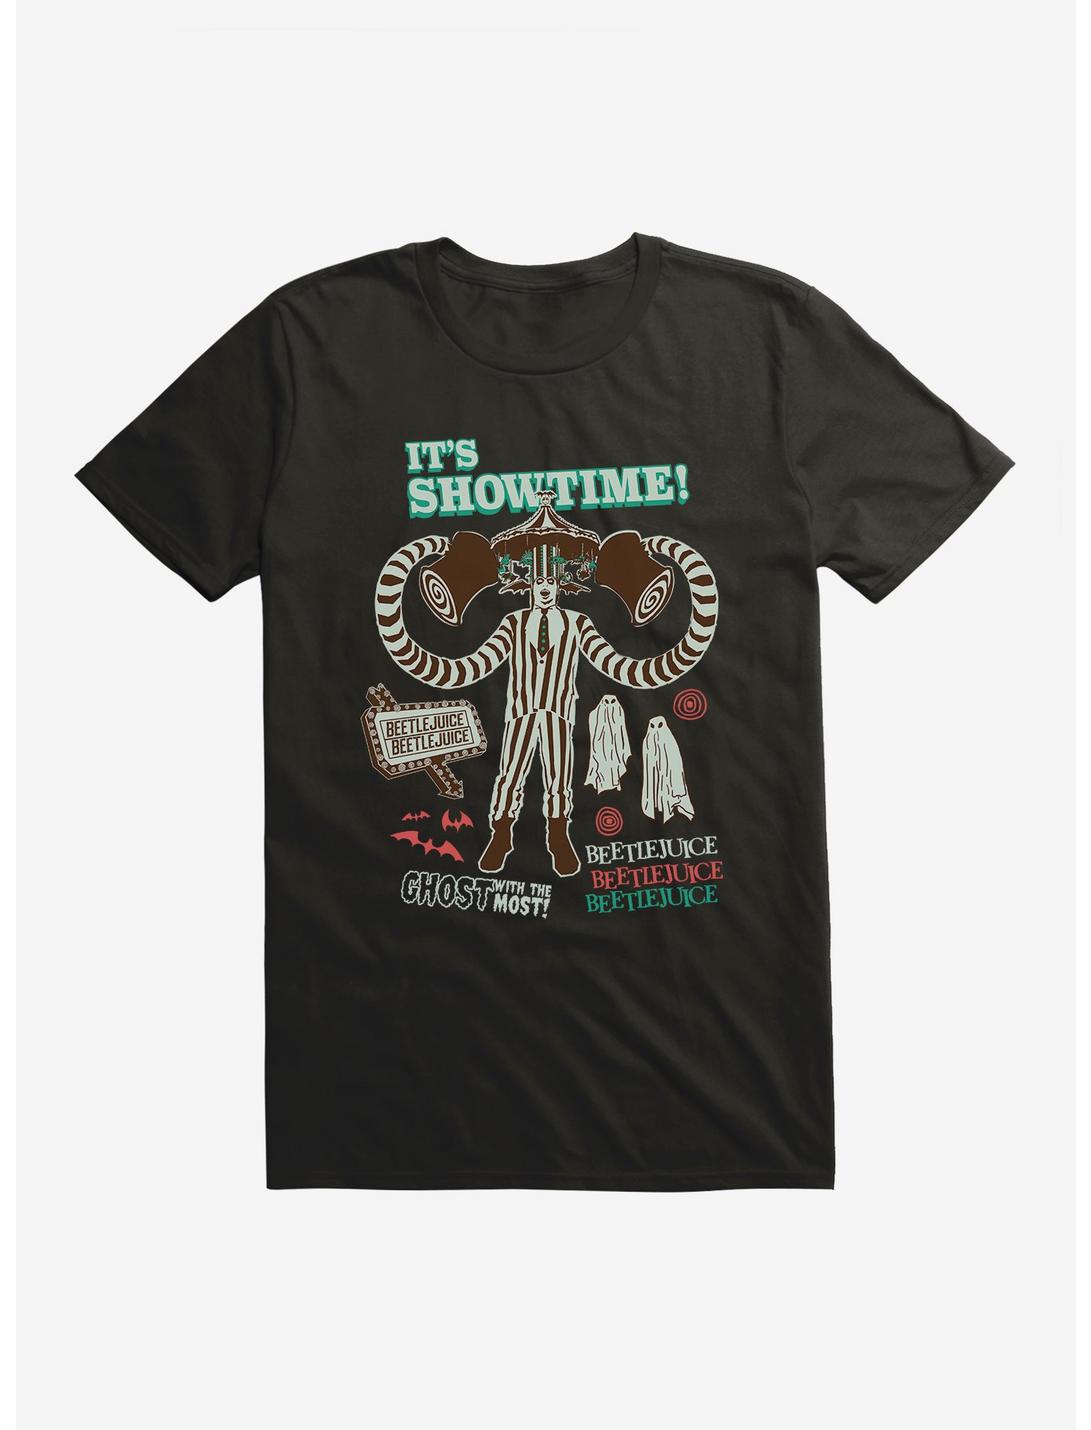 Beetlejuice Ghost With The Most! T-Shirt, BLACK, hi-res